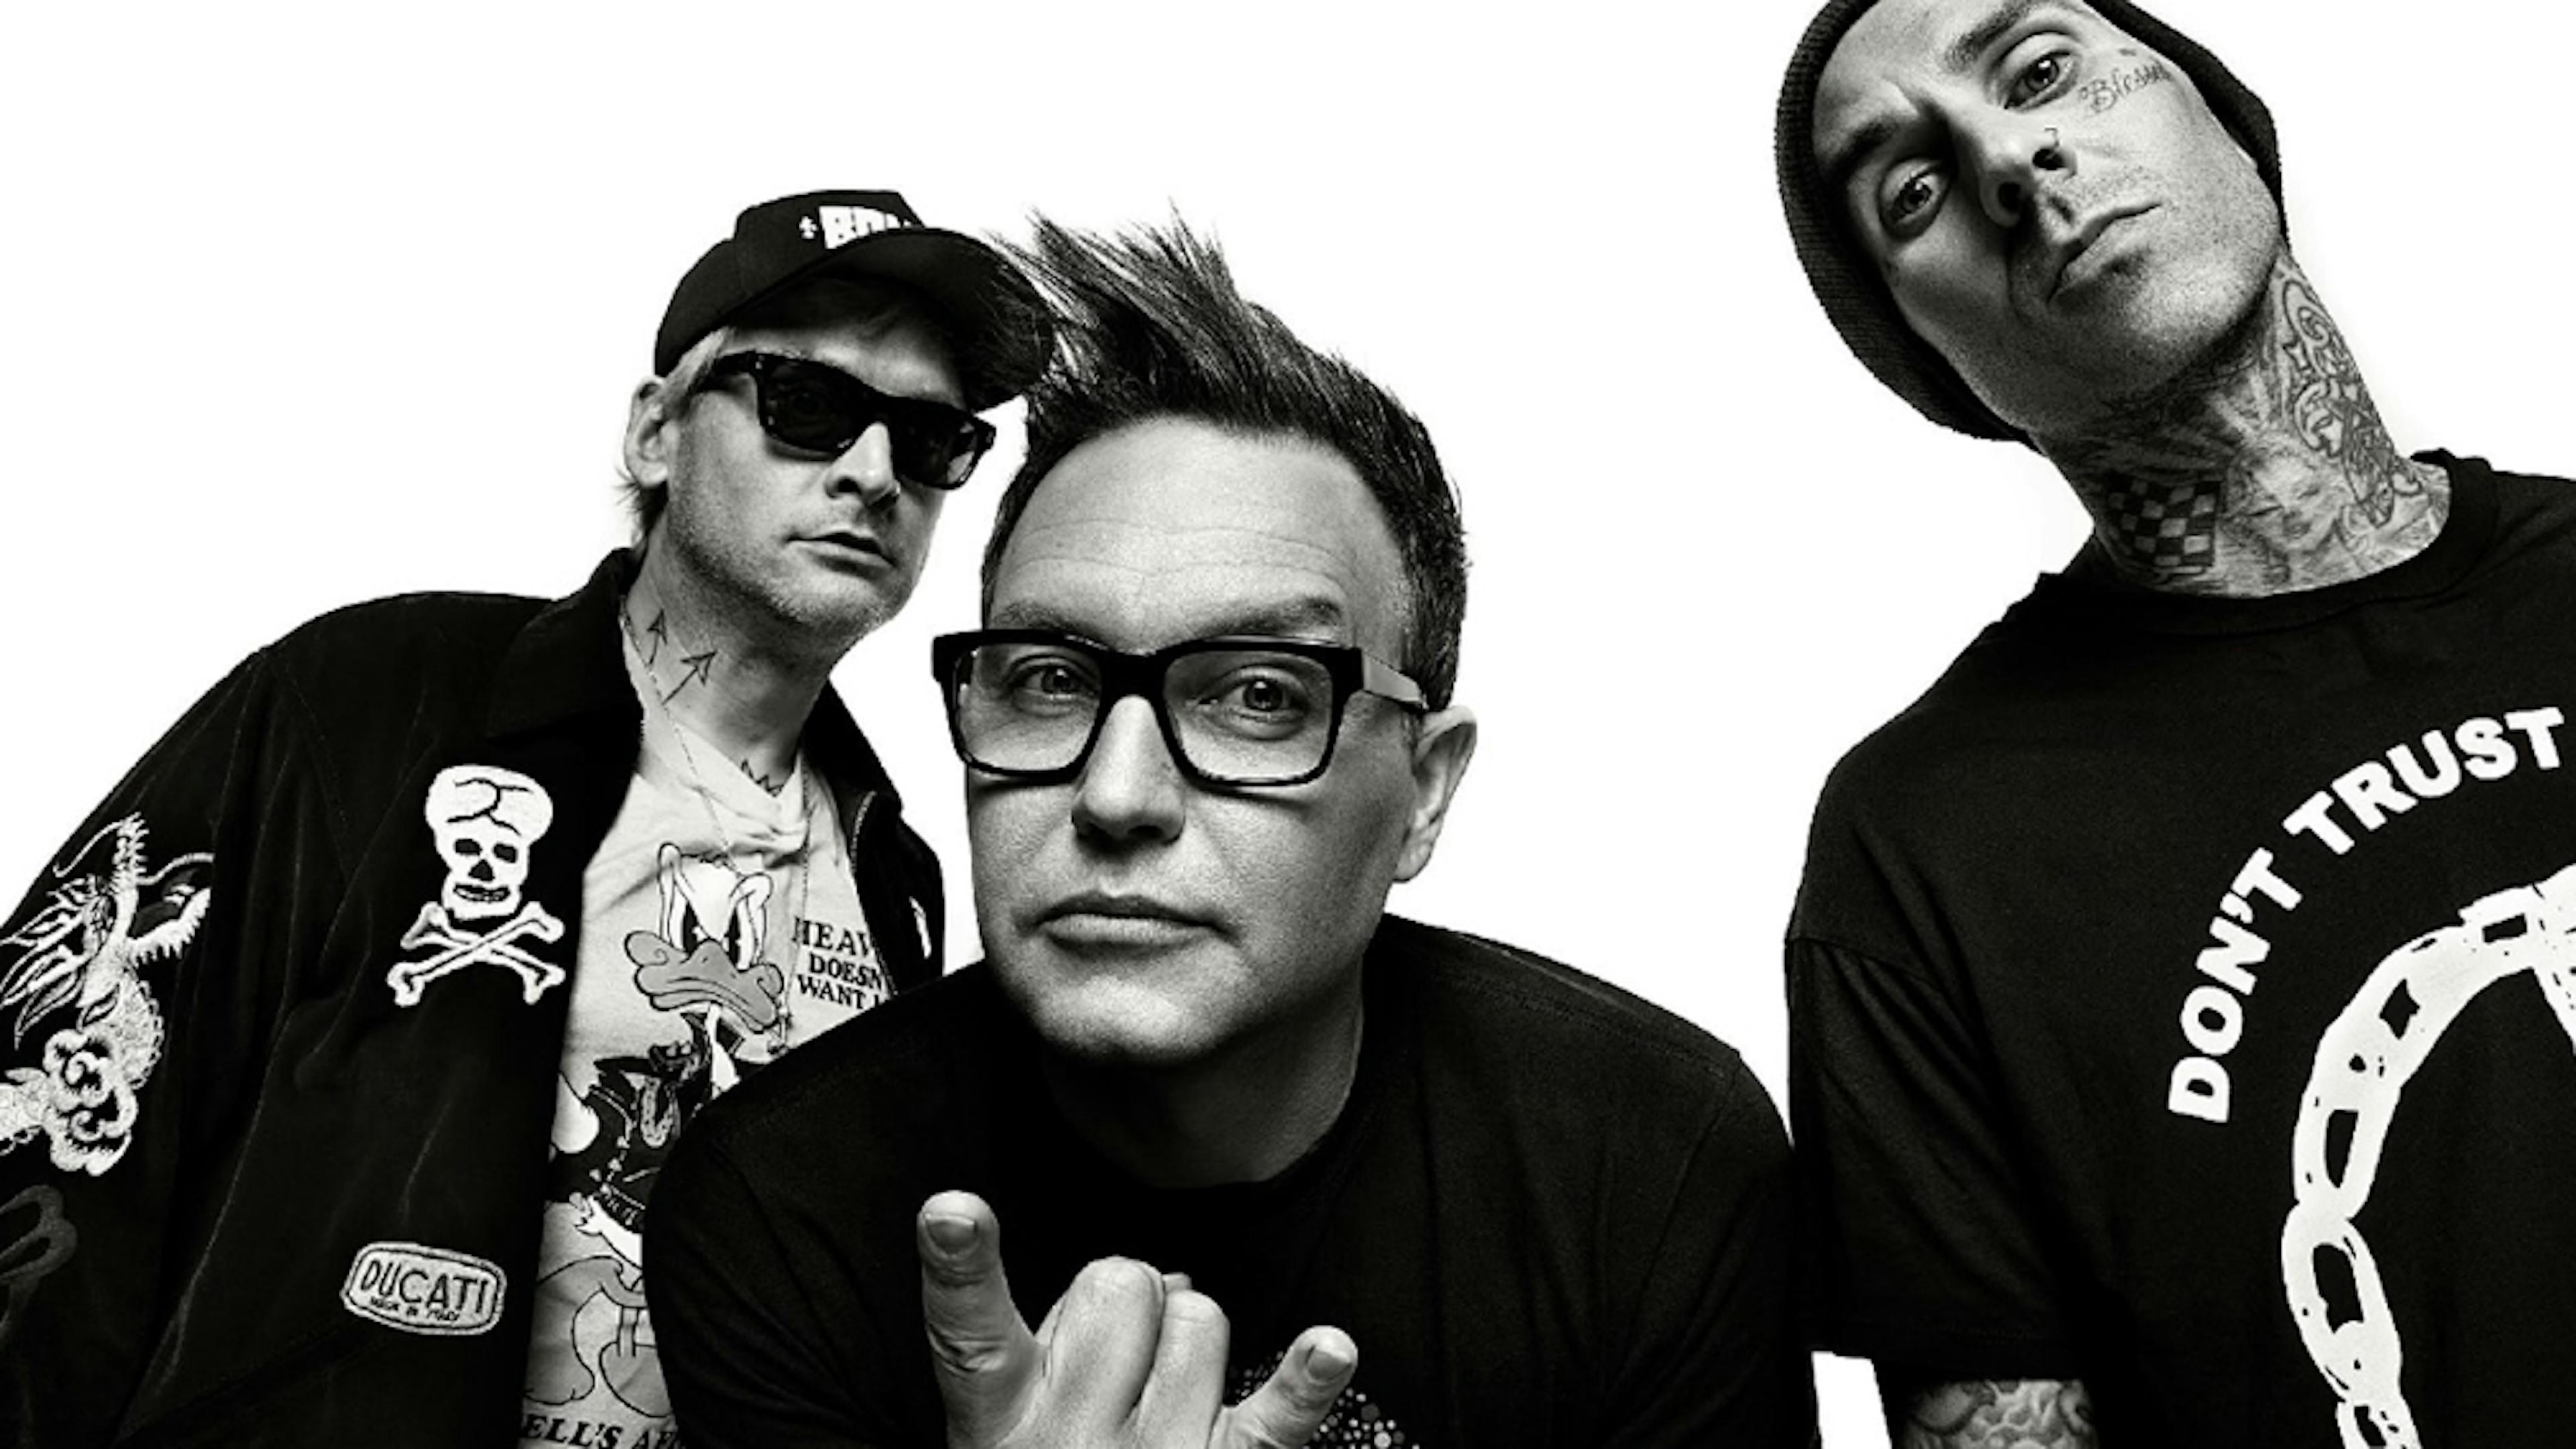 blink-182 Were 'Locked Down' During Yesterday's Shooting In El Paso, Texas